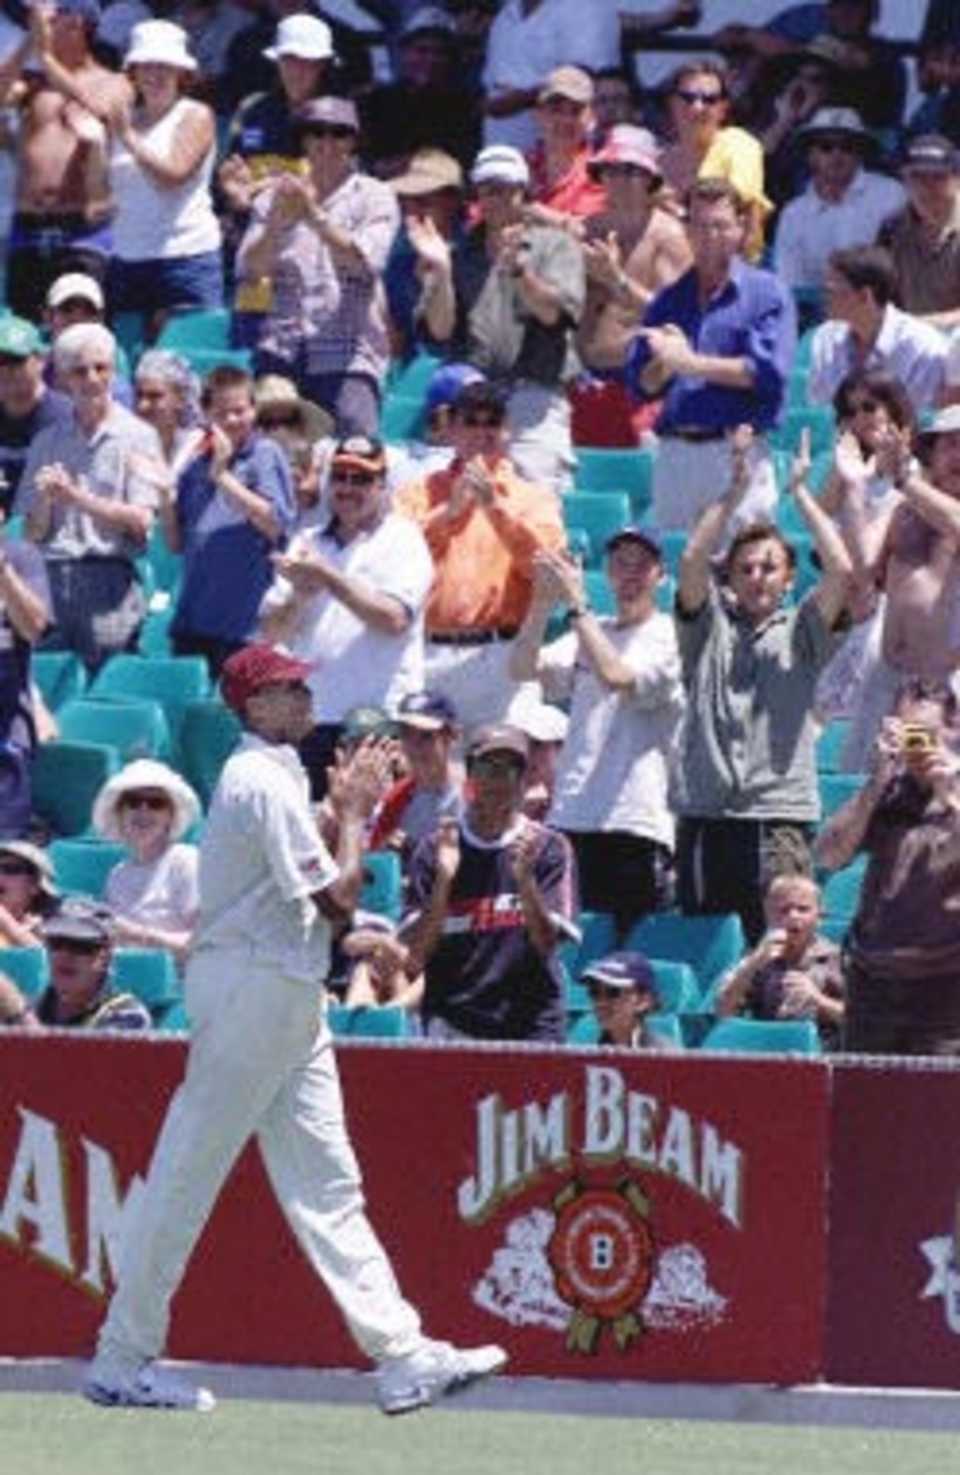 Courtney Walsh gets a standing ovation from the crowd at the Sydney Cricket Ground